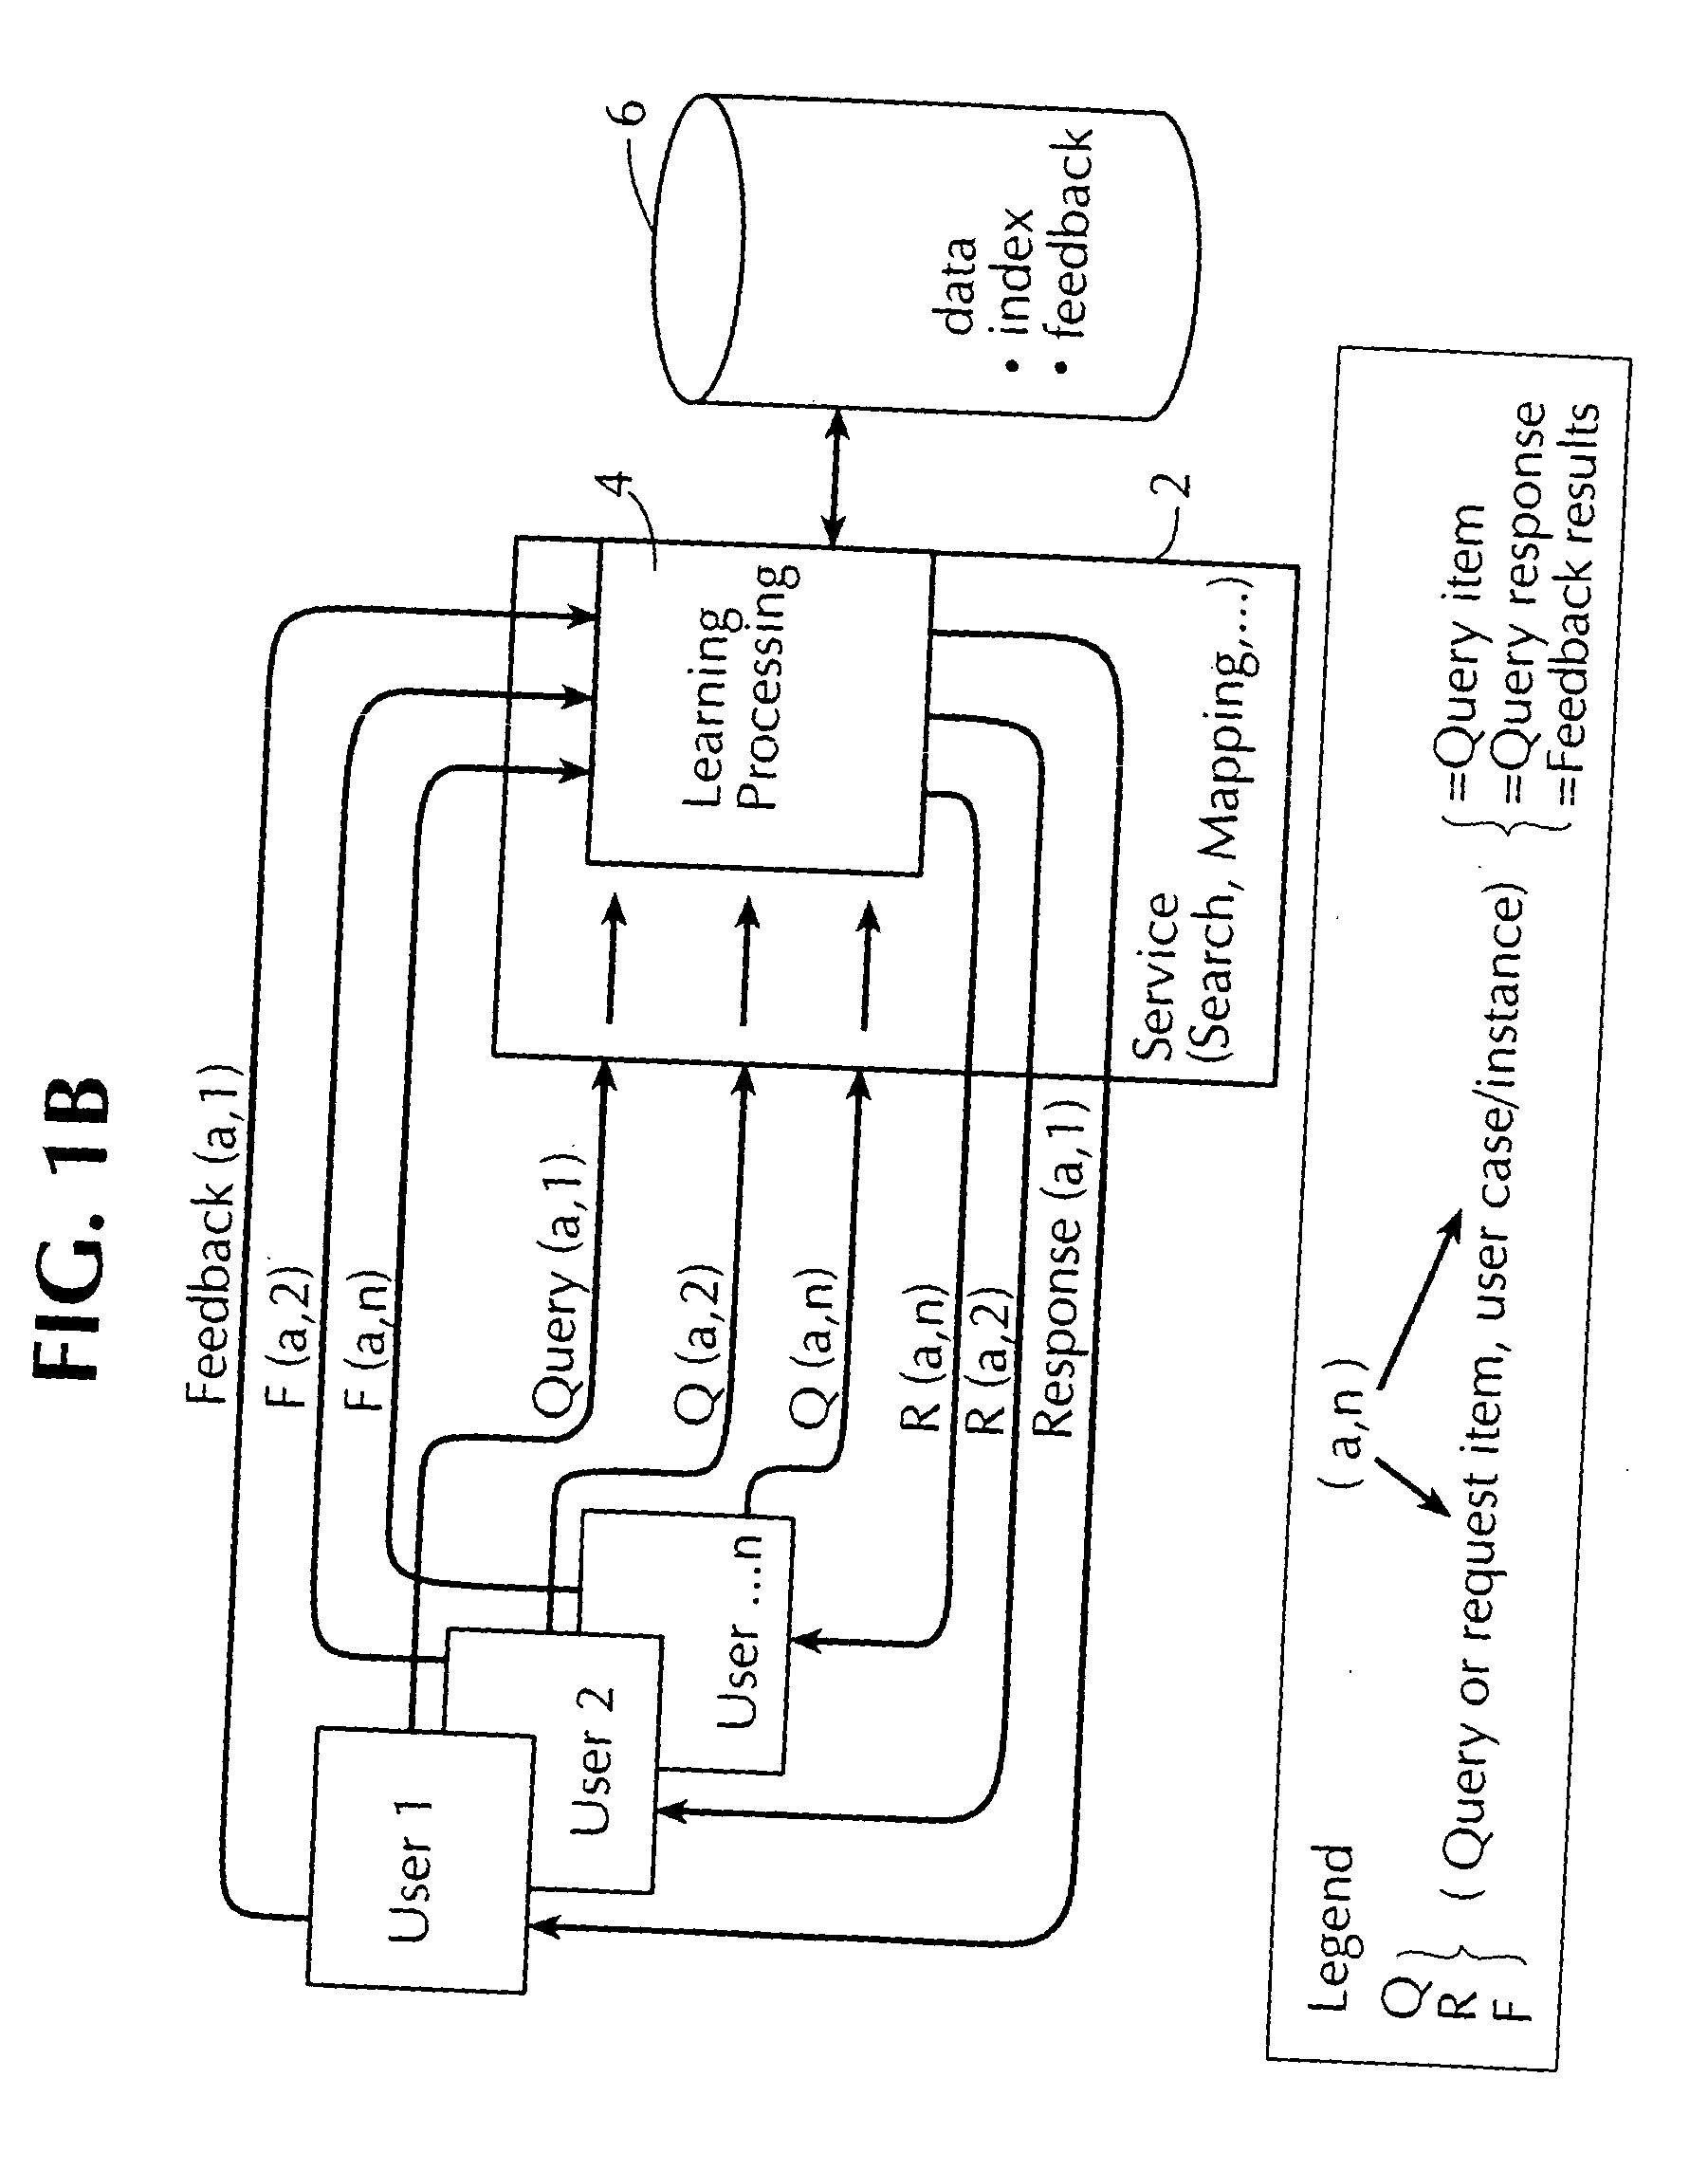 Method and apparatus for utilizing user feedback to improve signifier mapping